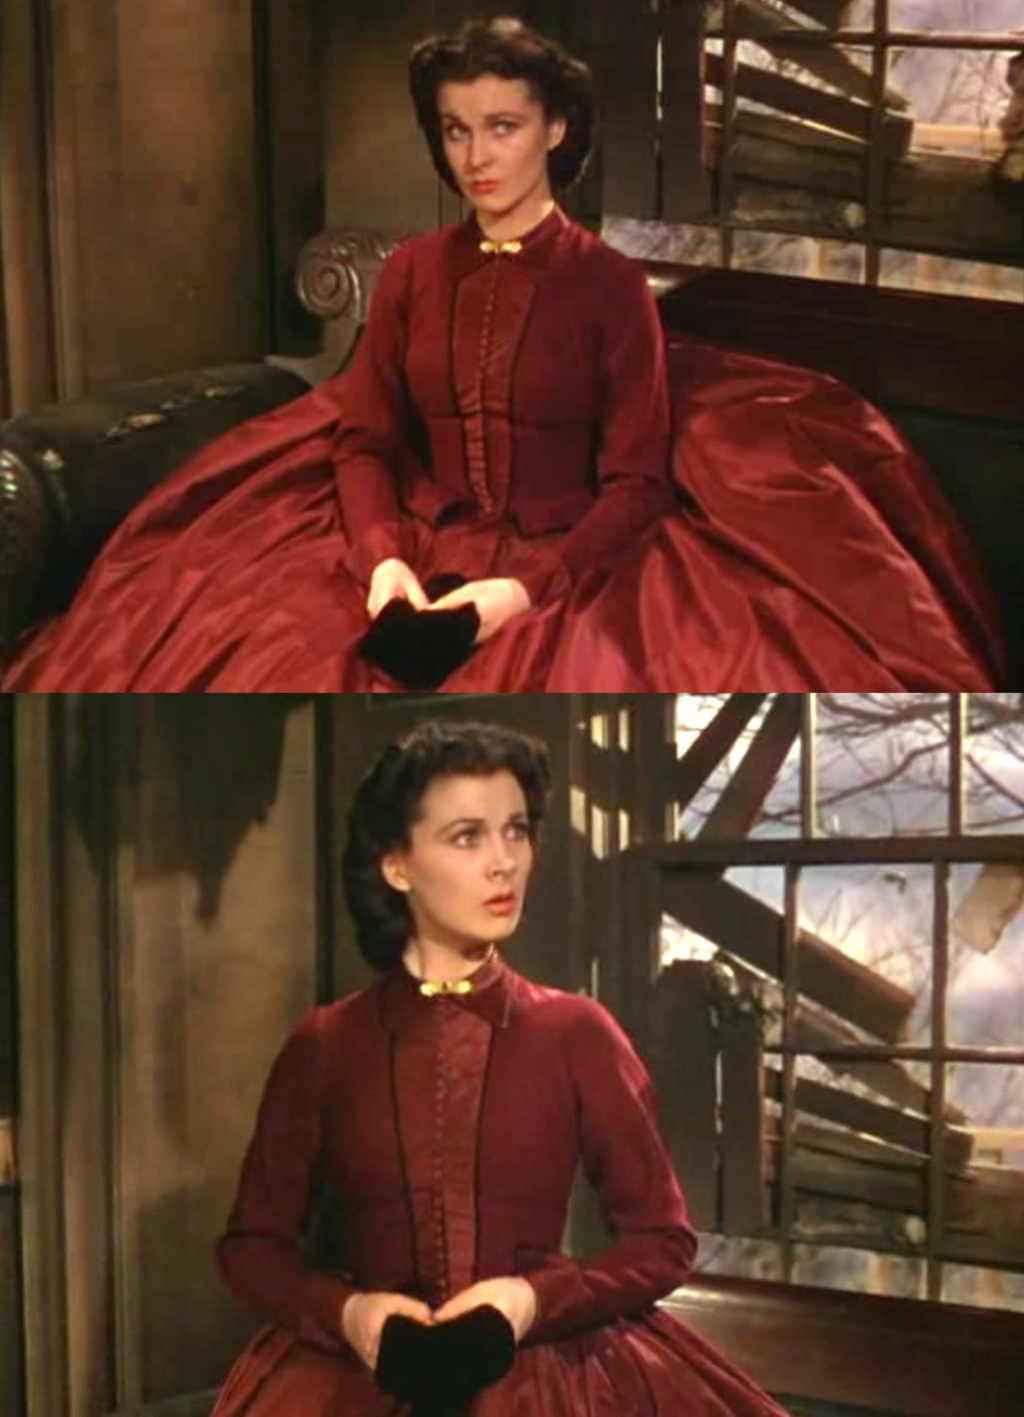 Long Lost Gone with the Wind Gown Worn by Vivien Leigh Up for Auction |  Vanity Fair